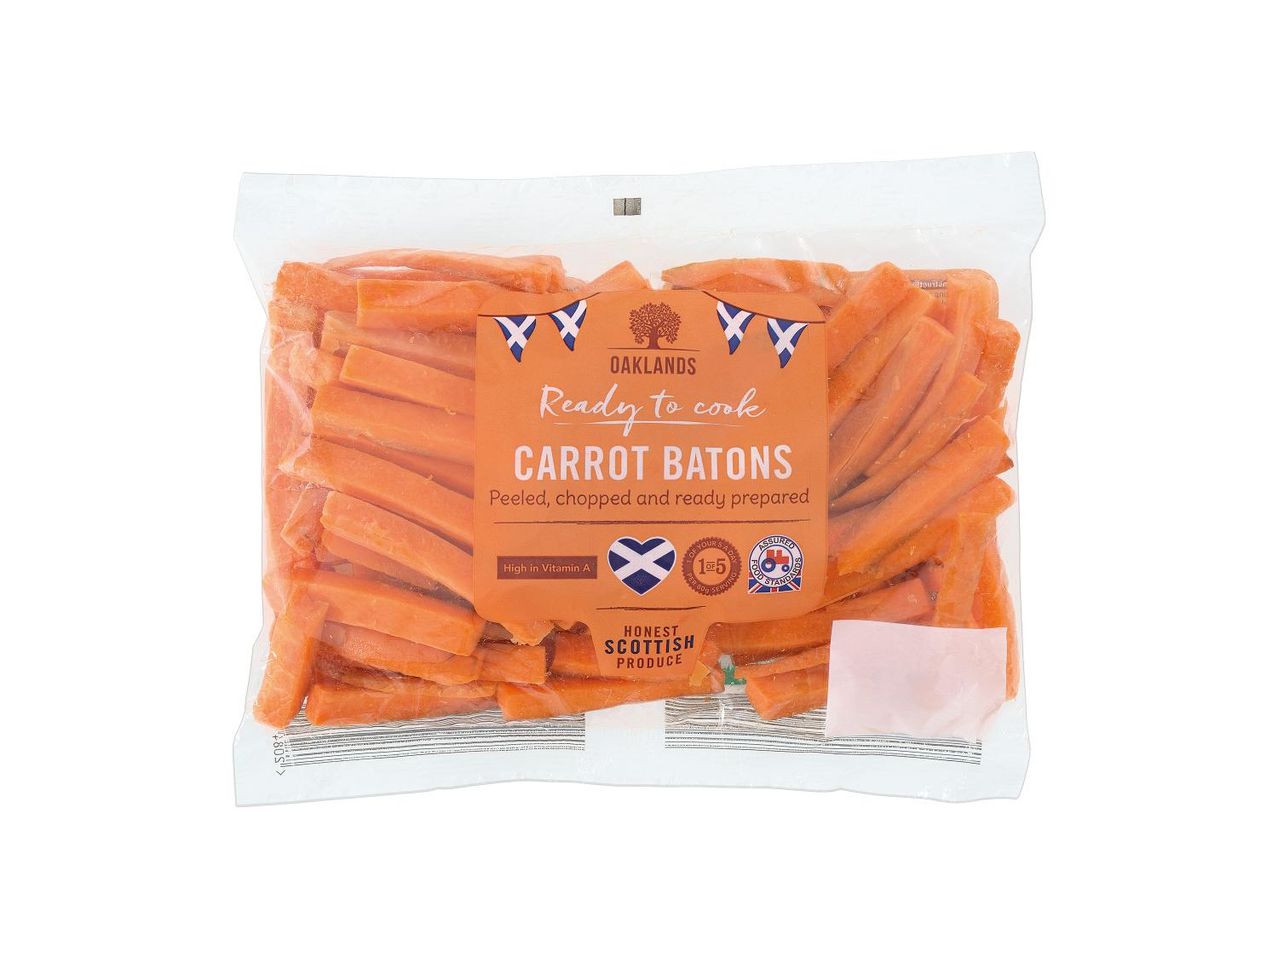 Go to full screen view: Oaklands Carrot Batons - Image 1